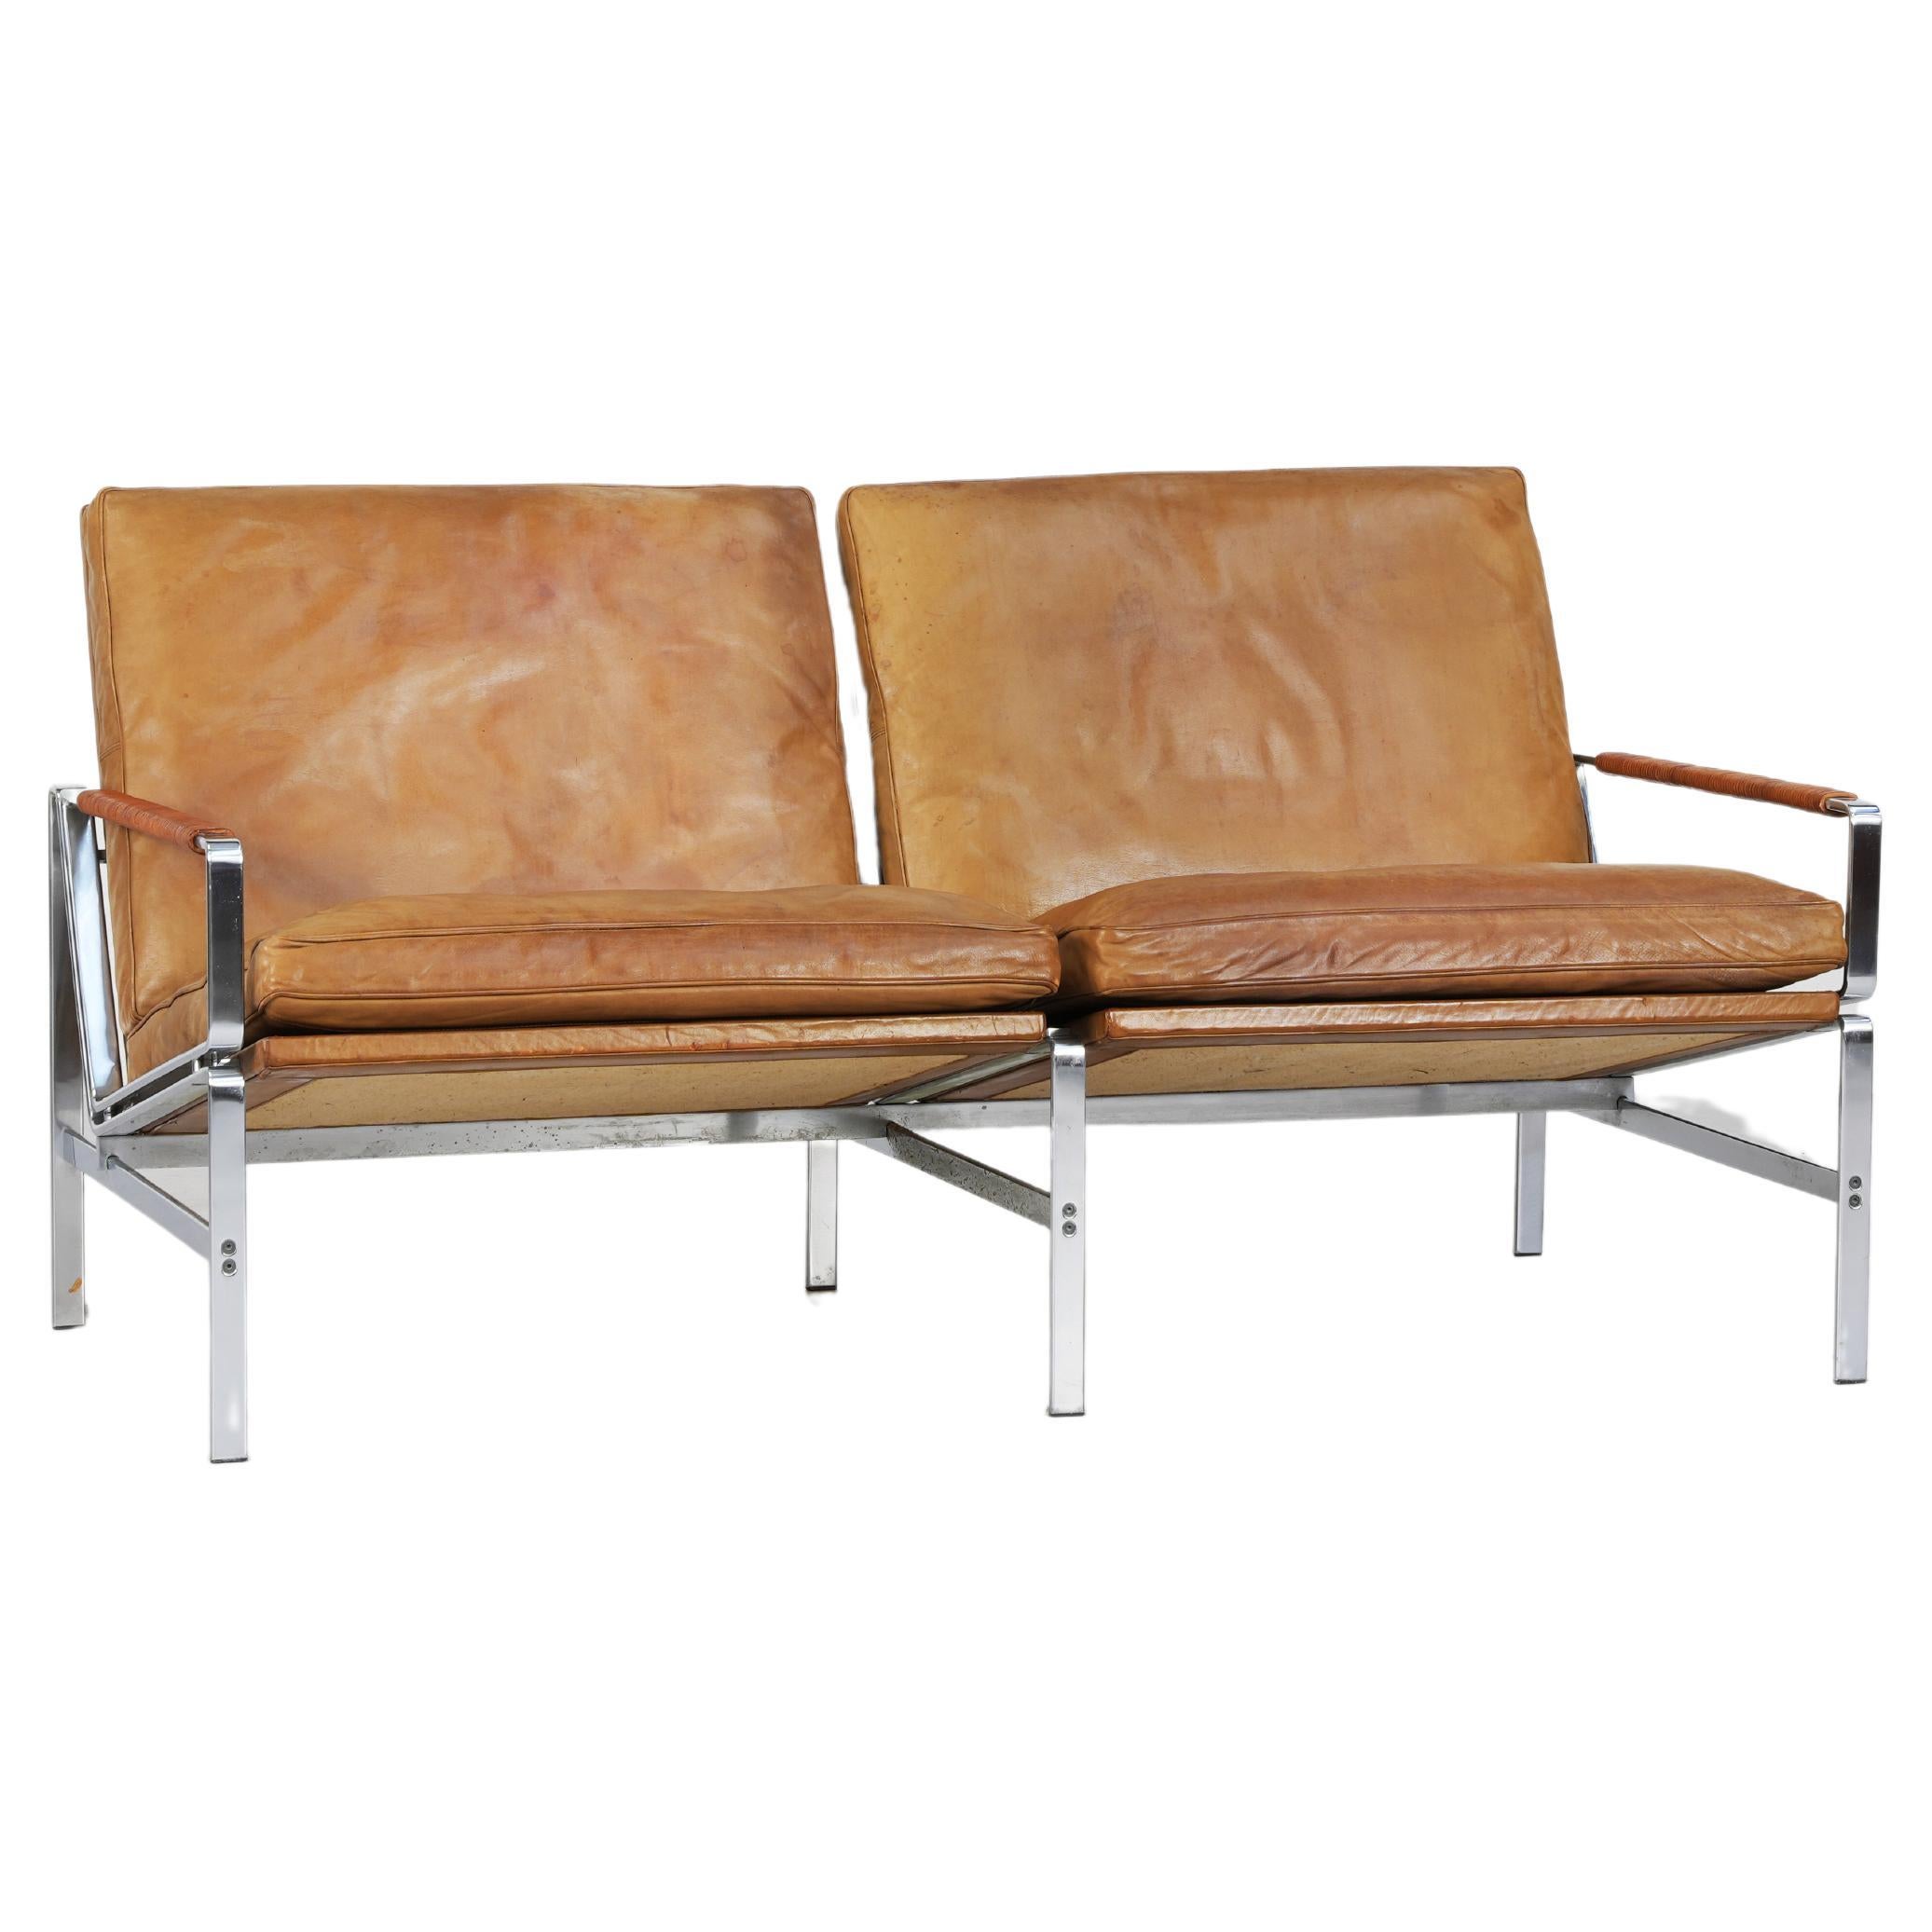 Danish Two Seater Sofa 6720 by Fabricius & Kastholm for Kill International, 1968 For Sale